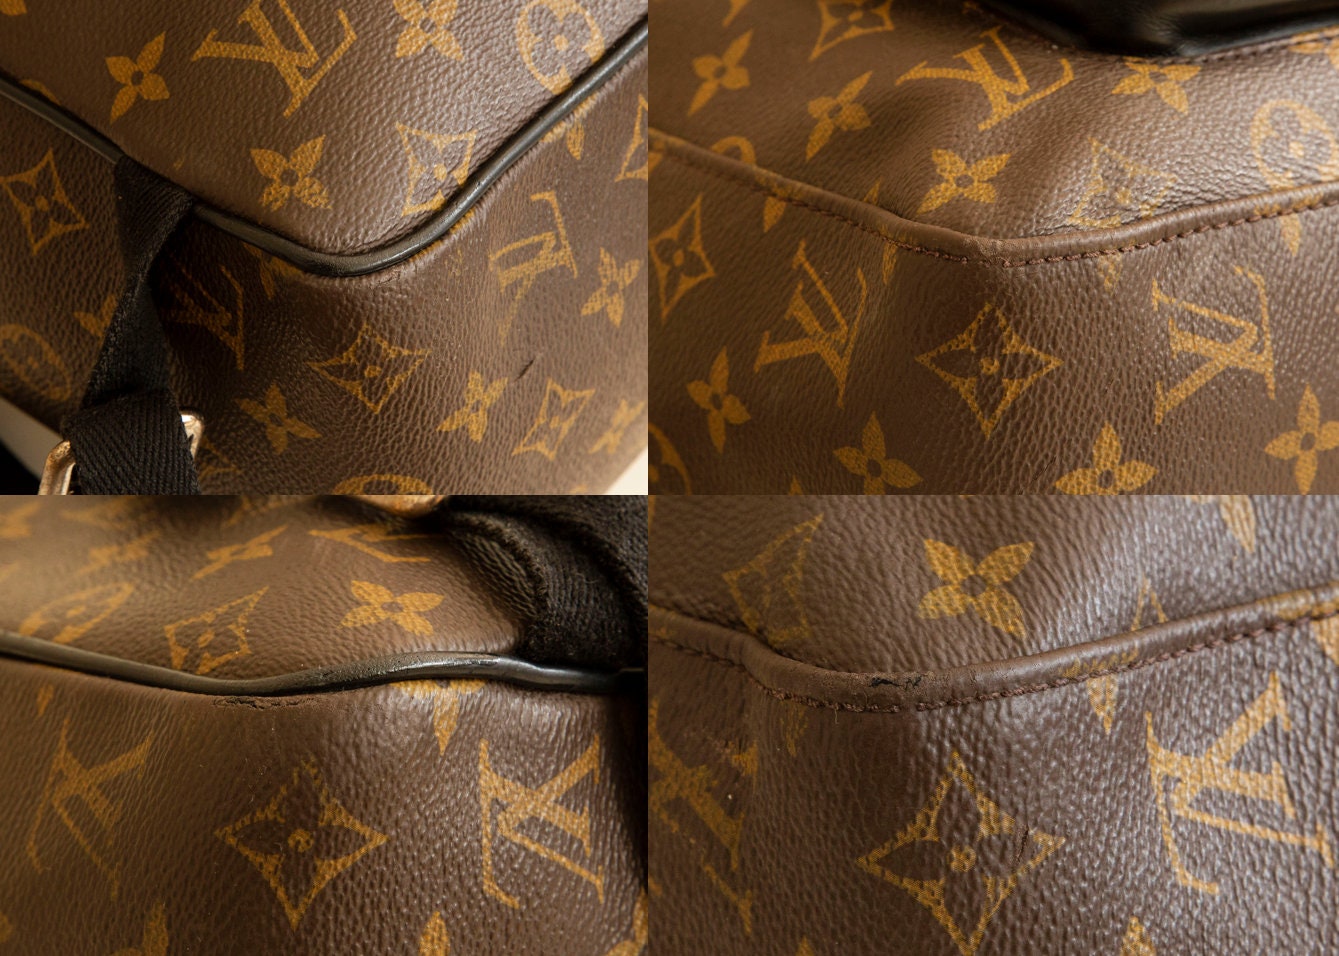 Louis Vuitton Josh Backpack in Good Condition -  Israel